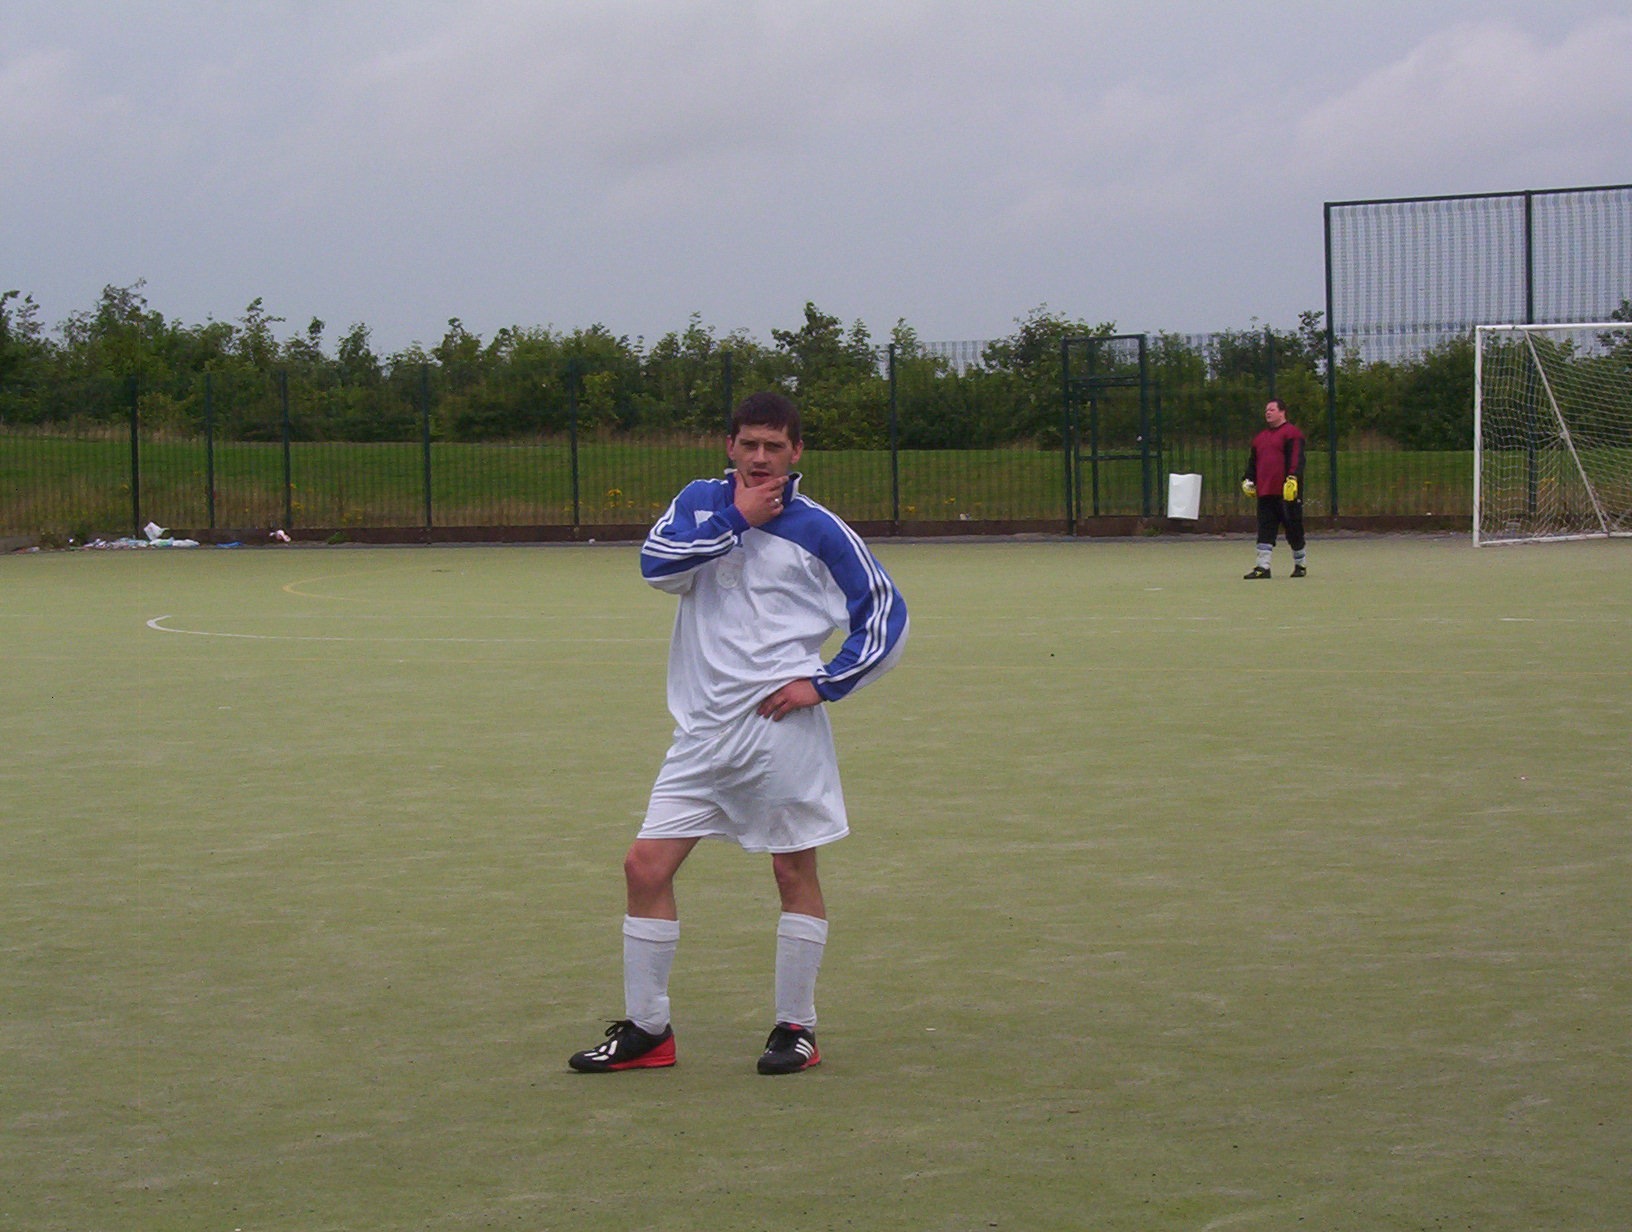 11-a-side 2004 The Lost Year